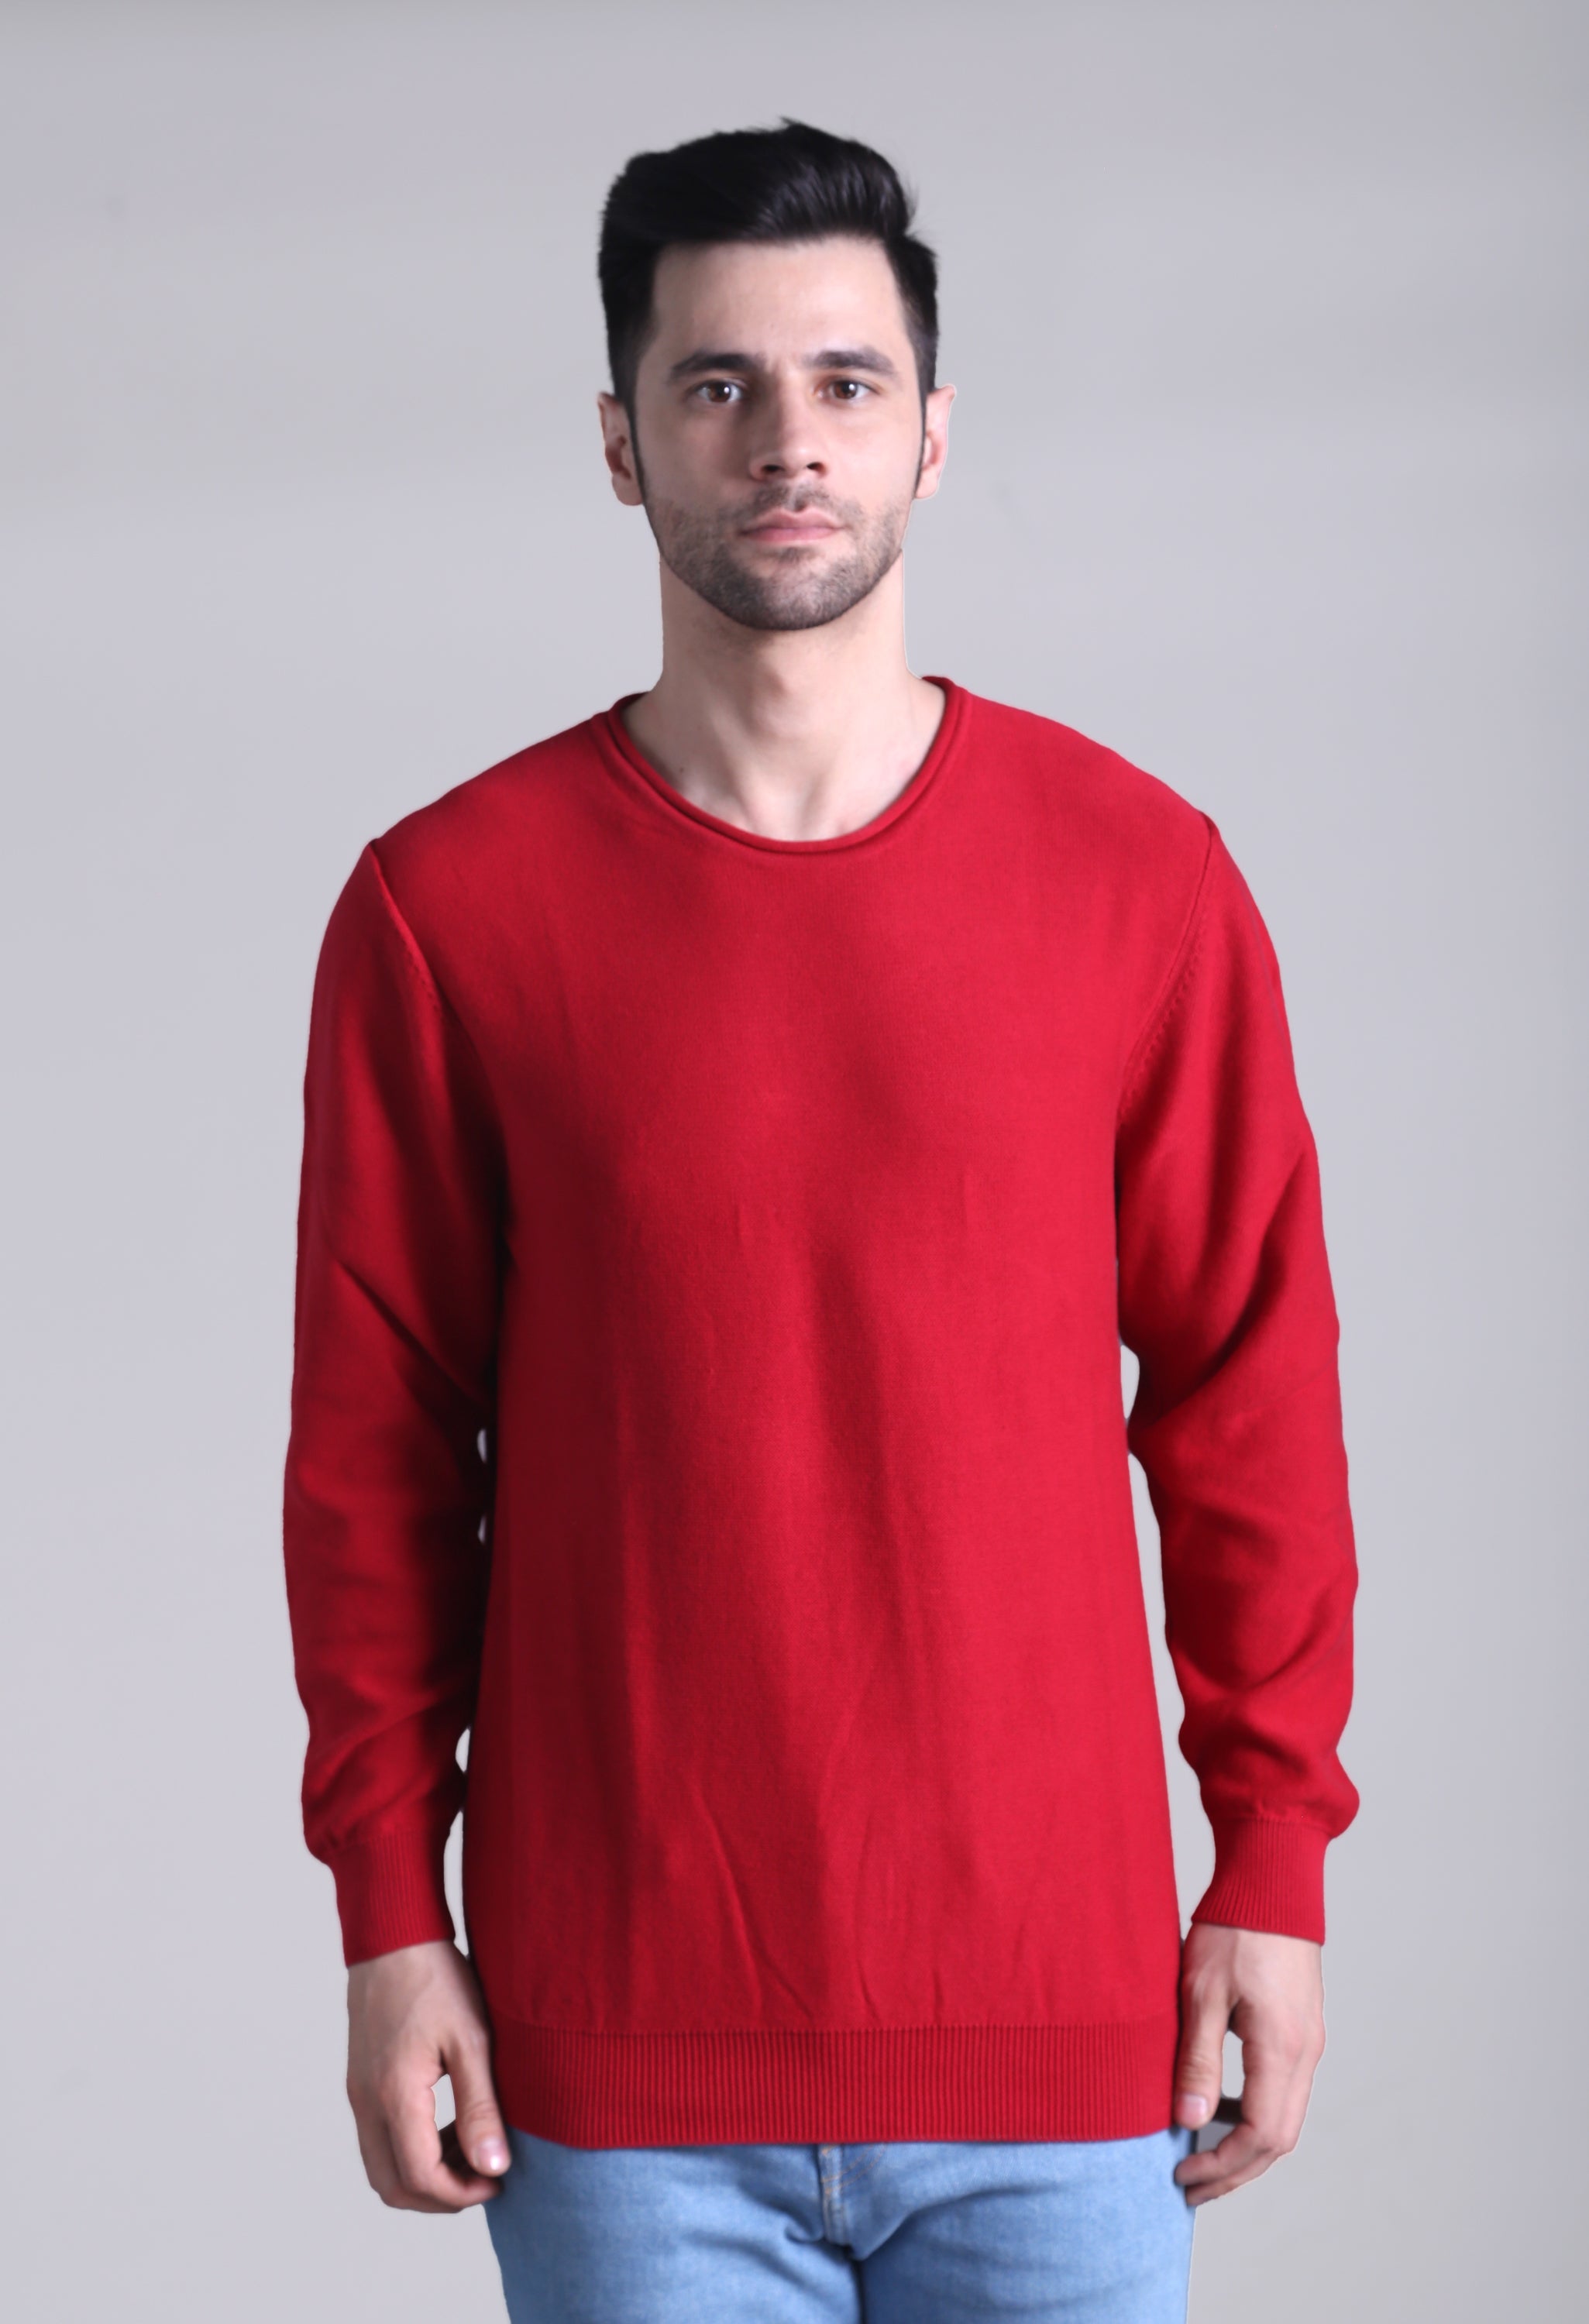 Solid Plane Red Sweater - SQUIREHOOD